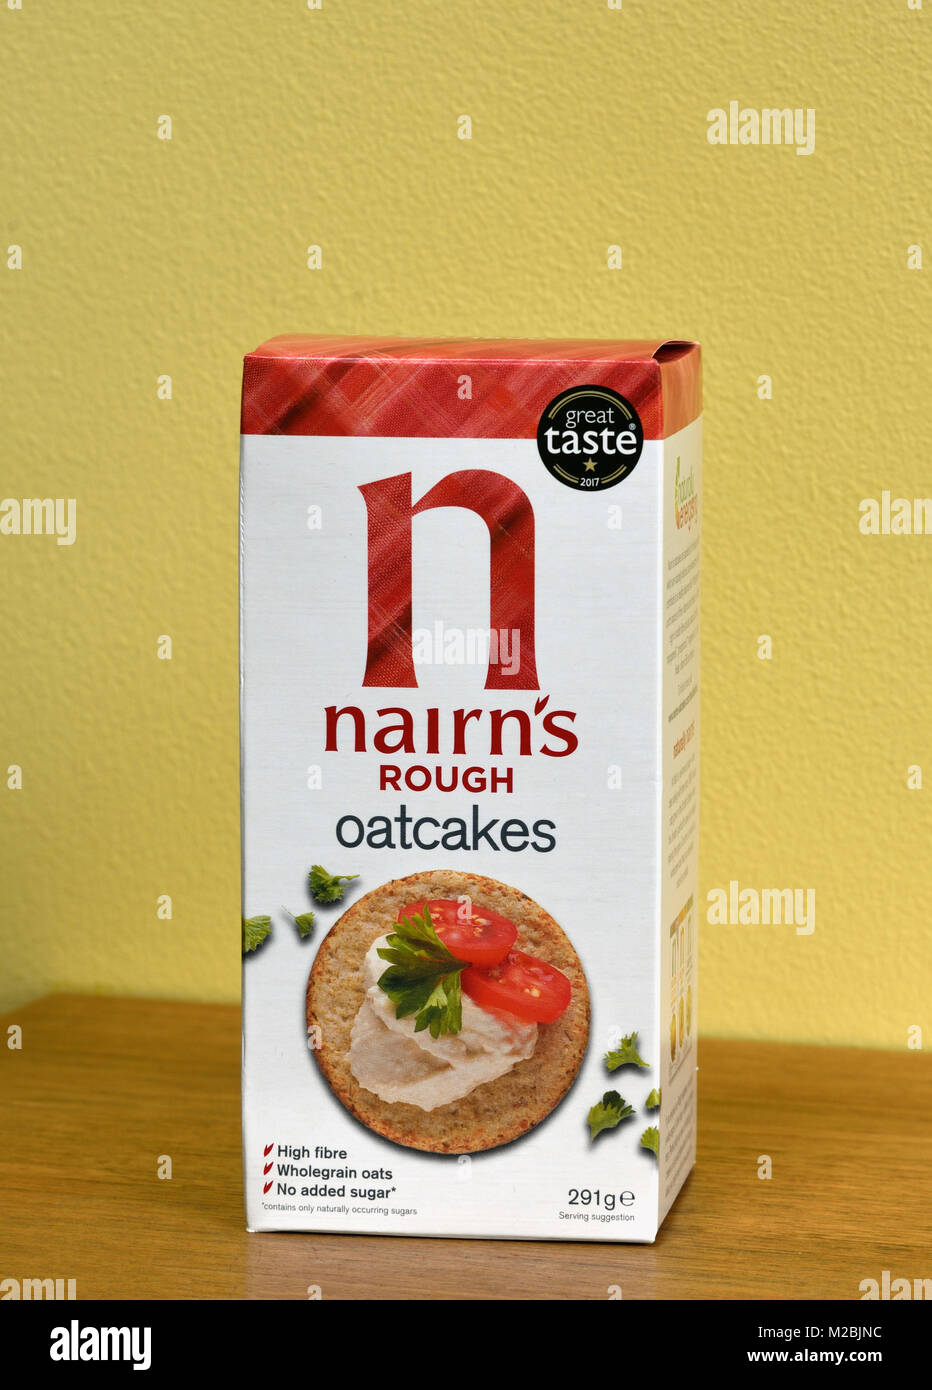 Packet of Nairn's Rough Oatcakes. High fibre, wholegrain oats, no added sugar. 291g. Stock Photo